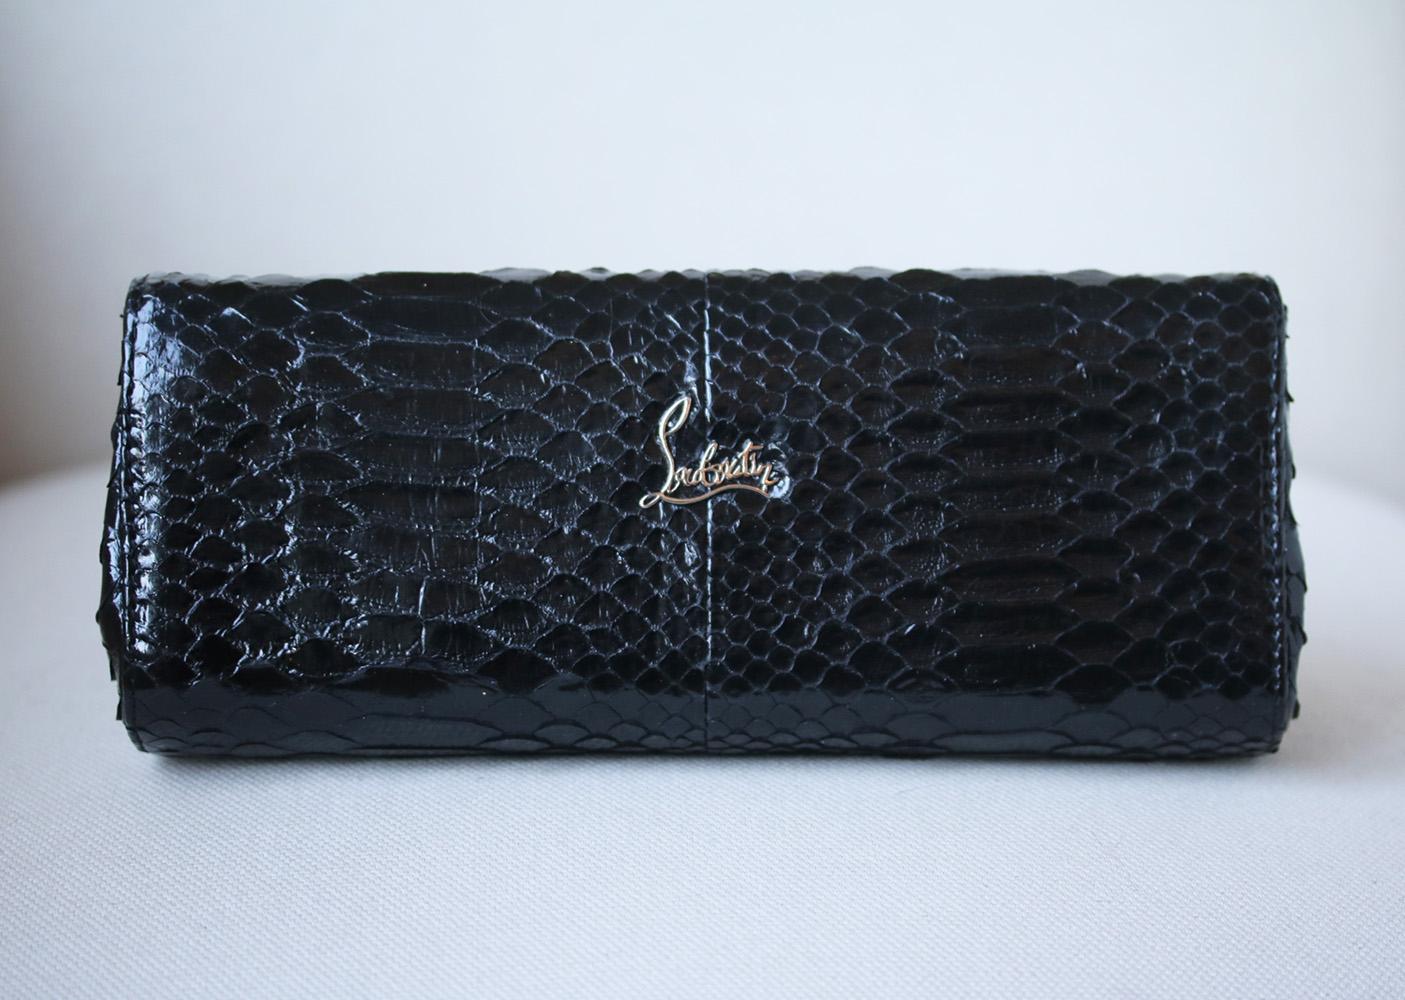 Christian Louboutin's clutch is crafted in Italy from black python and smooth leather. This spacious design has two internal compartments and a pull-out mirror for touching up your lipstick. Black python and leather (Calf). Two snap-fastening front